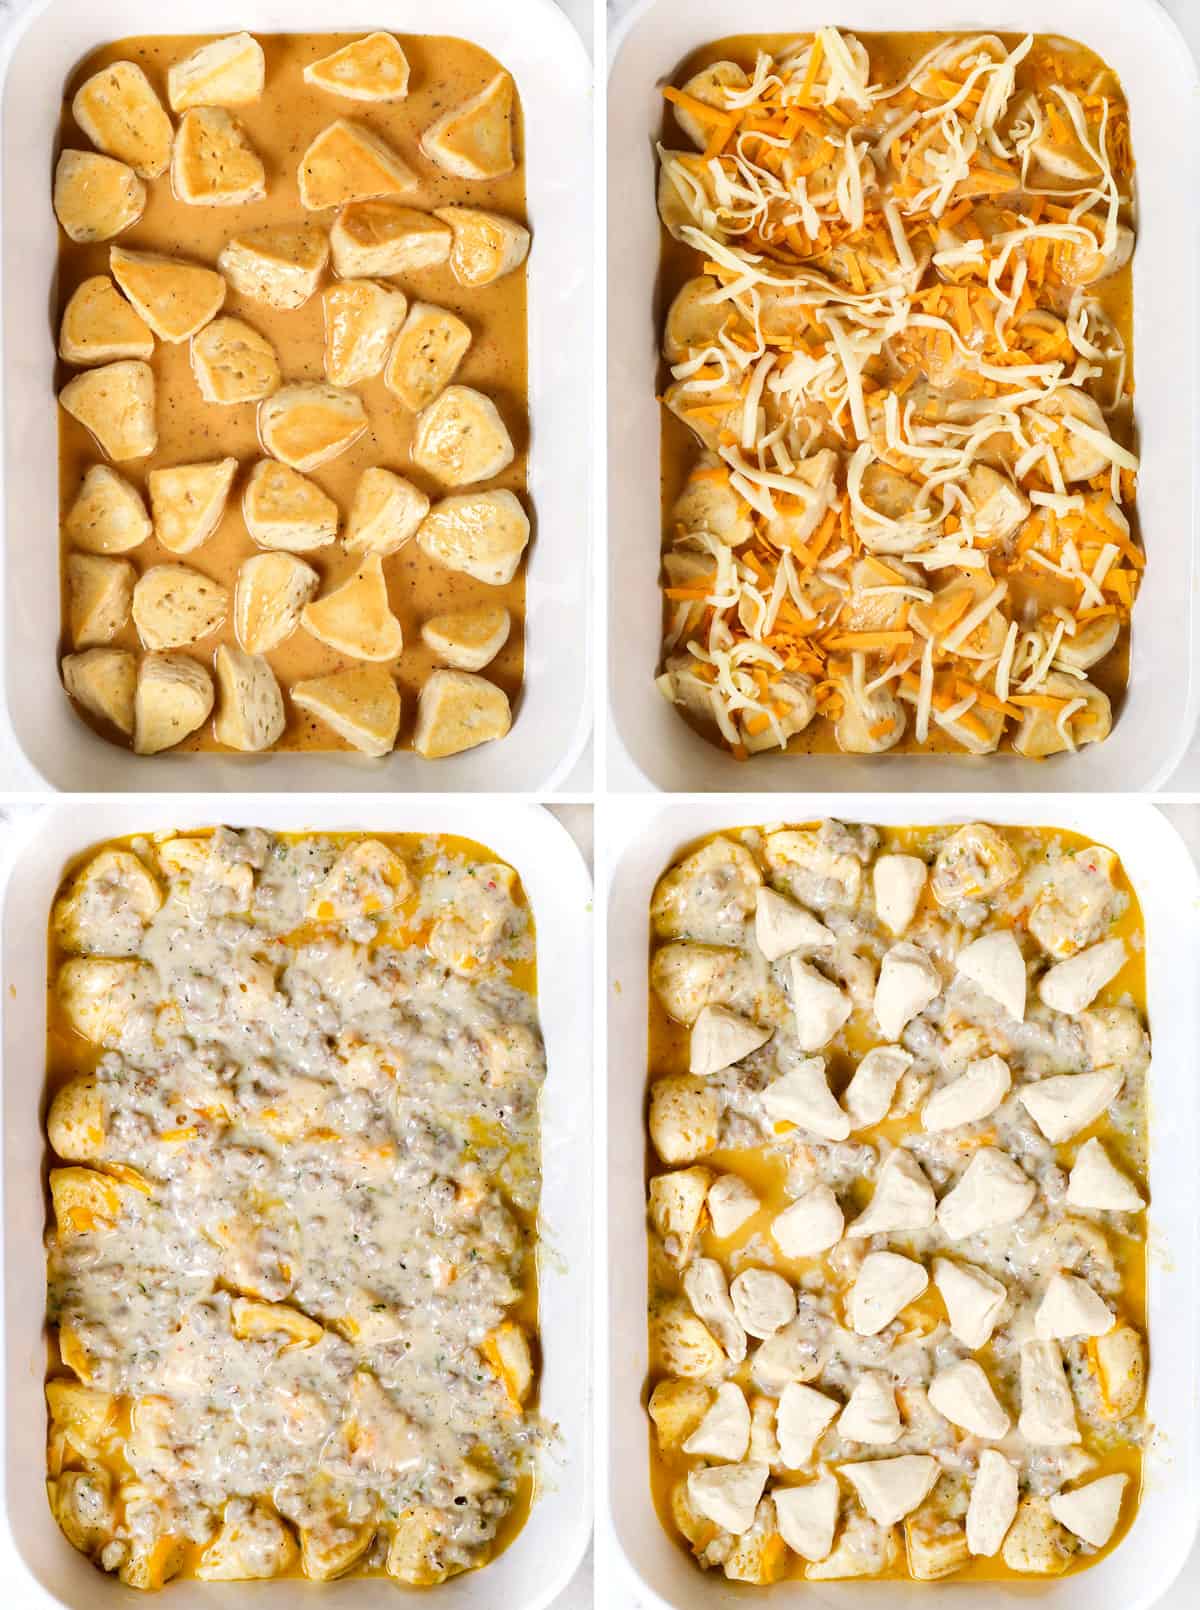 a collage showing how to make biscuits and gravy casserole by adding egg mixture over cut biscuits, followed by cheese, then gravy, then more biscuits